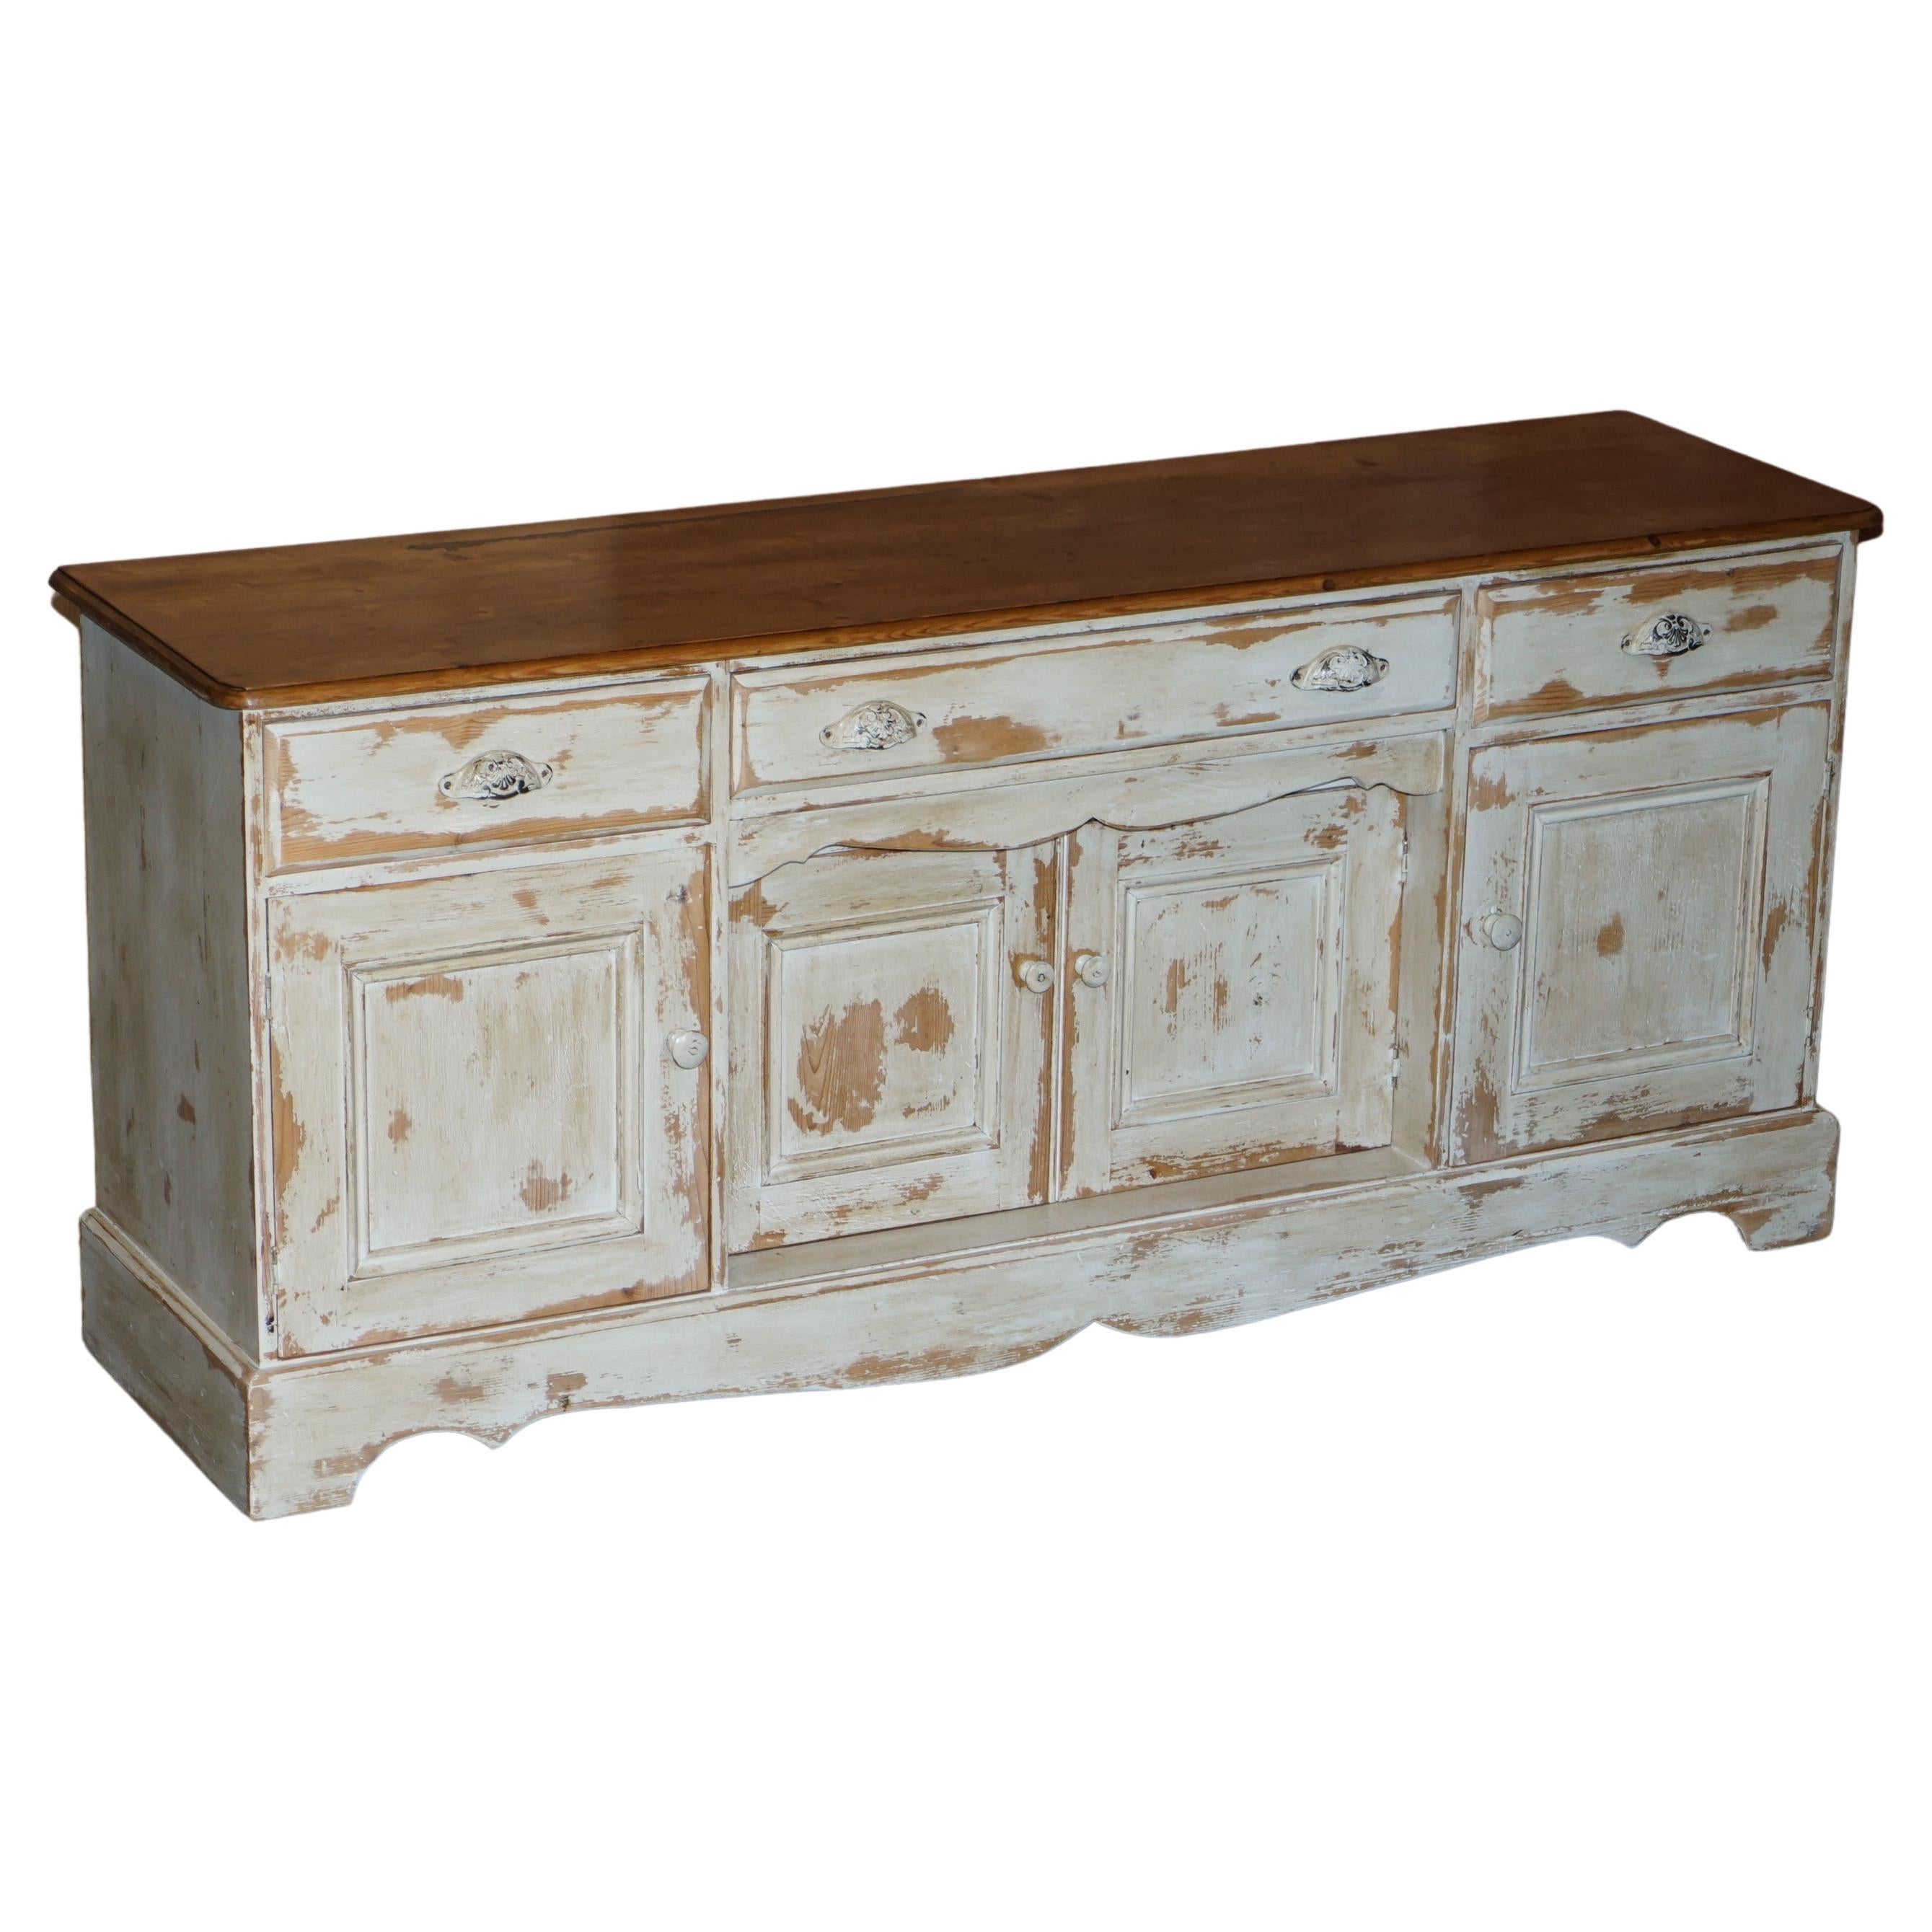 Lovely Vintage Hungarian Hand Painted and Antiqued Sideboard with Drawers